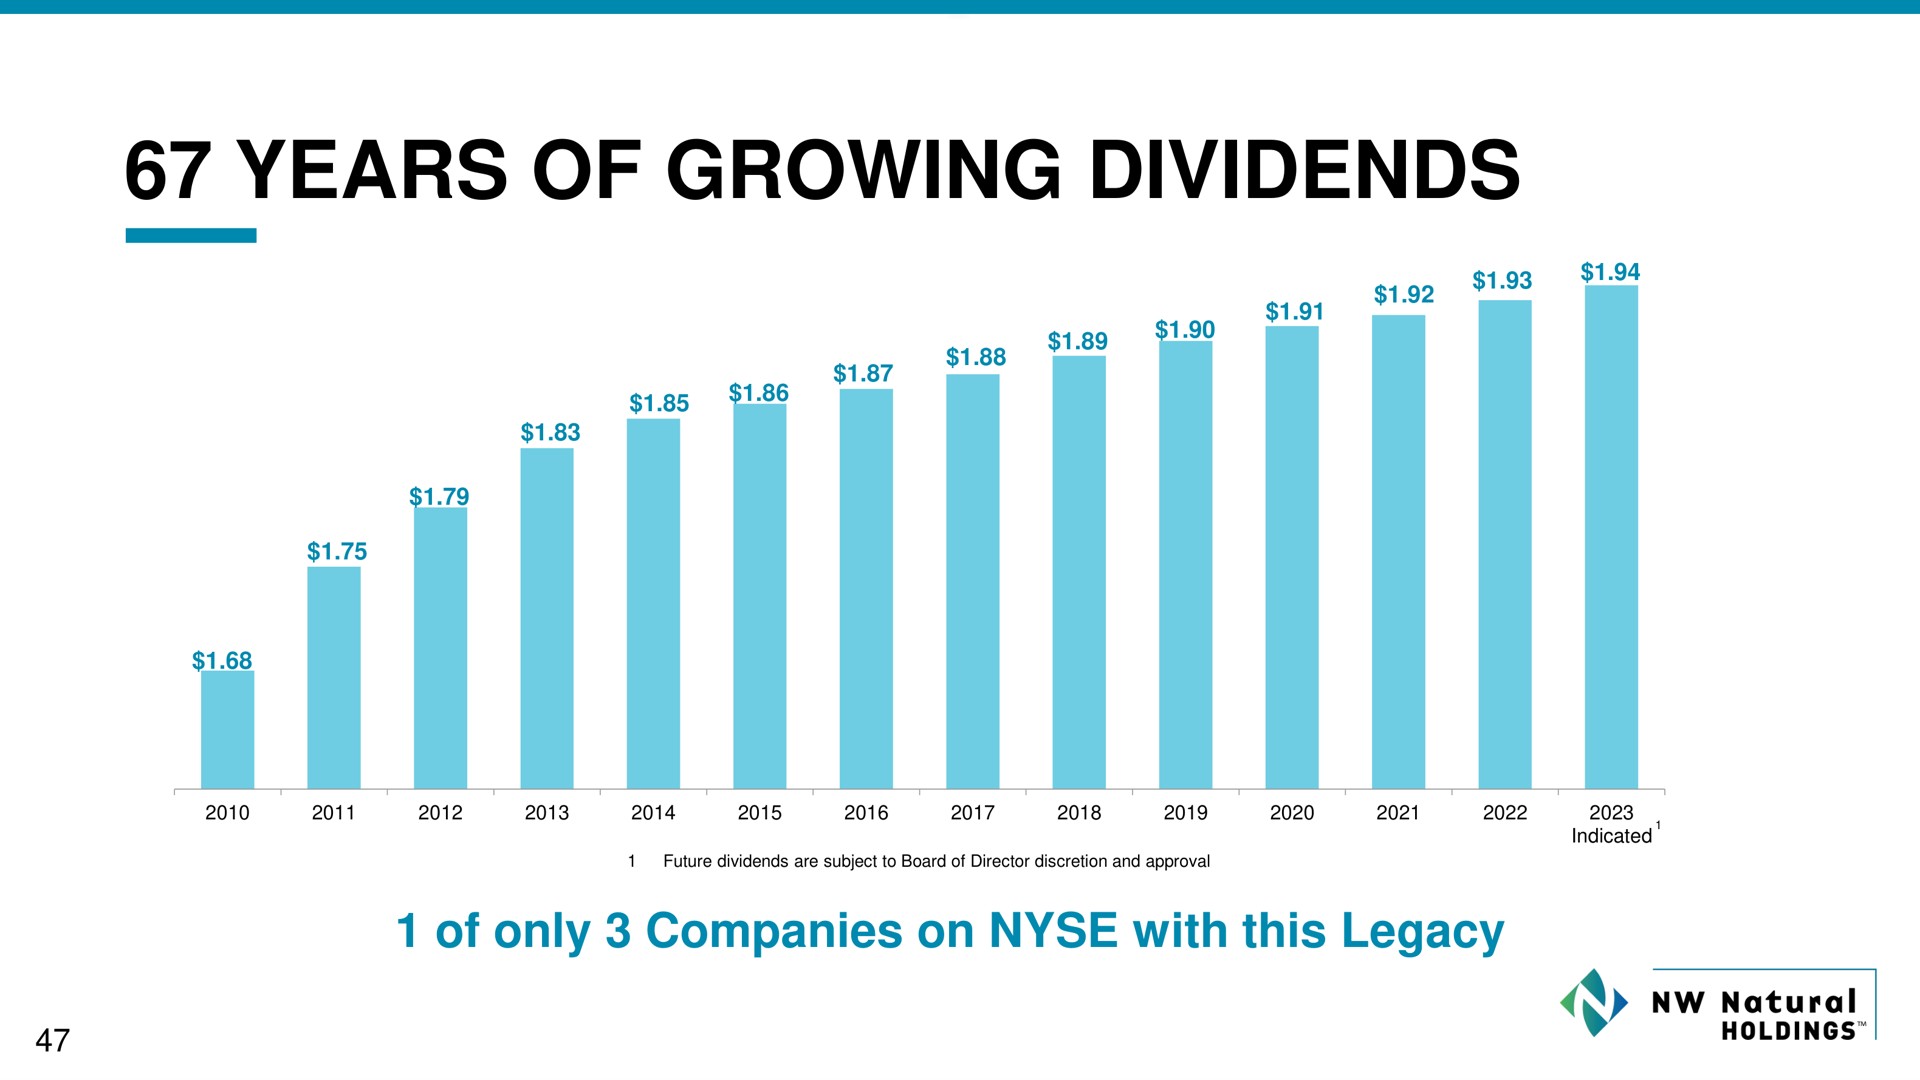 years of growing dividends a | NW Natural Holdings